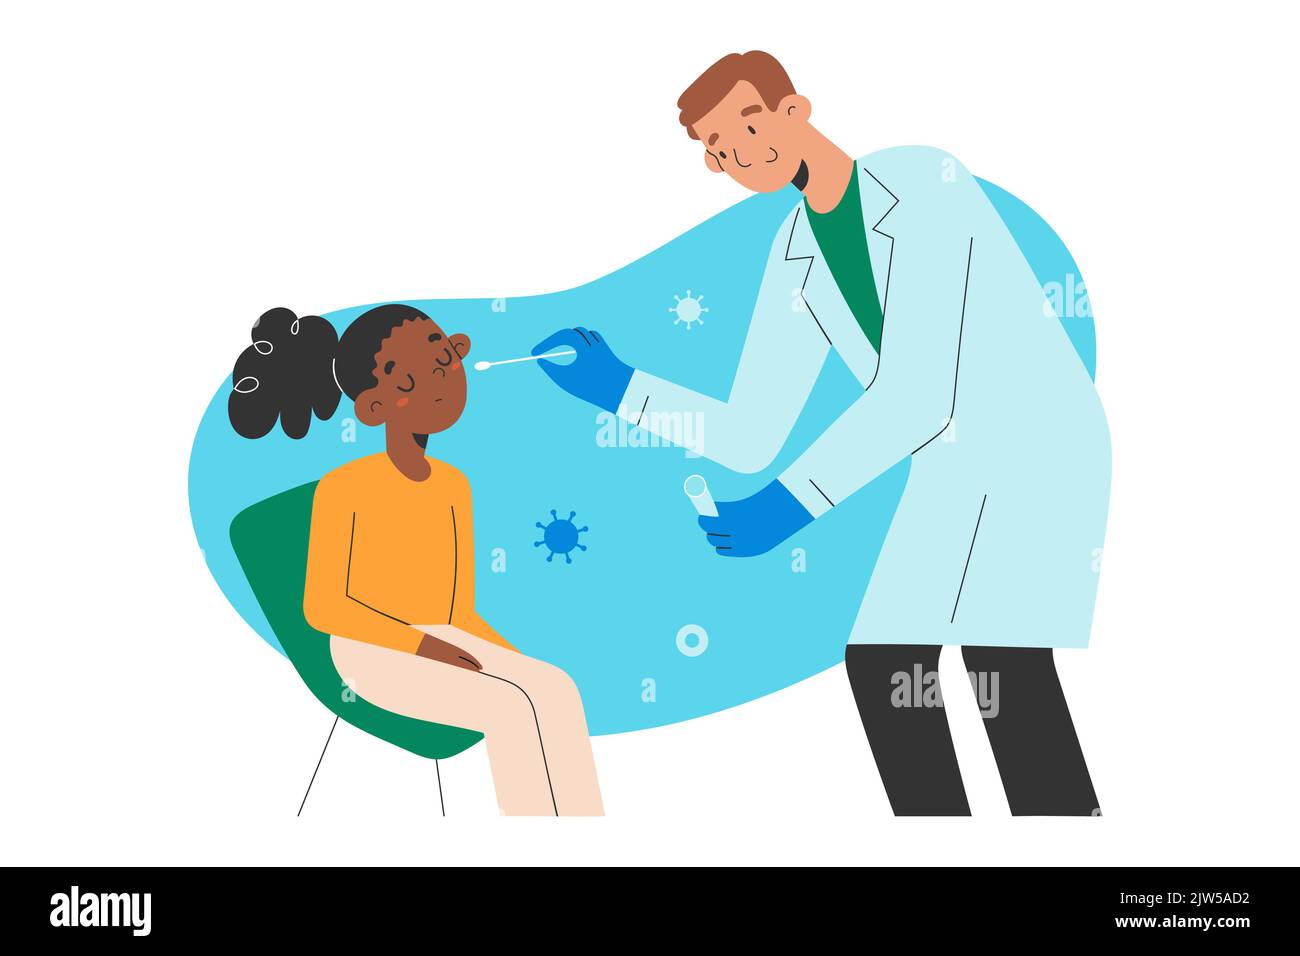 Childrens covid19 test. Friendly medical doctor using a cotton swab to test a an African-American girl for coronavirus, vector illustration Stock Vector